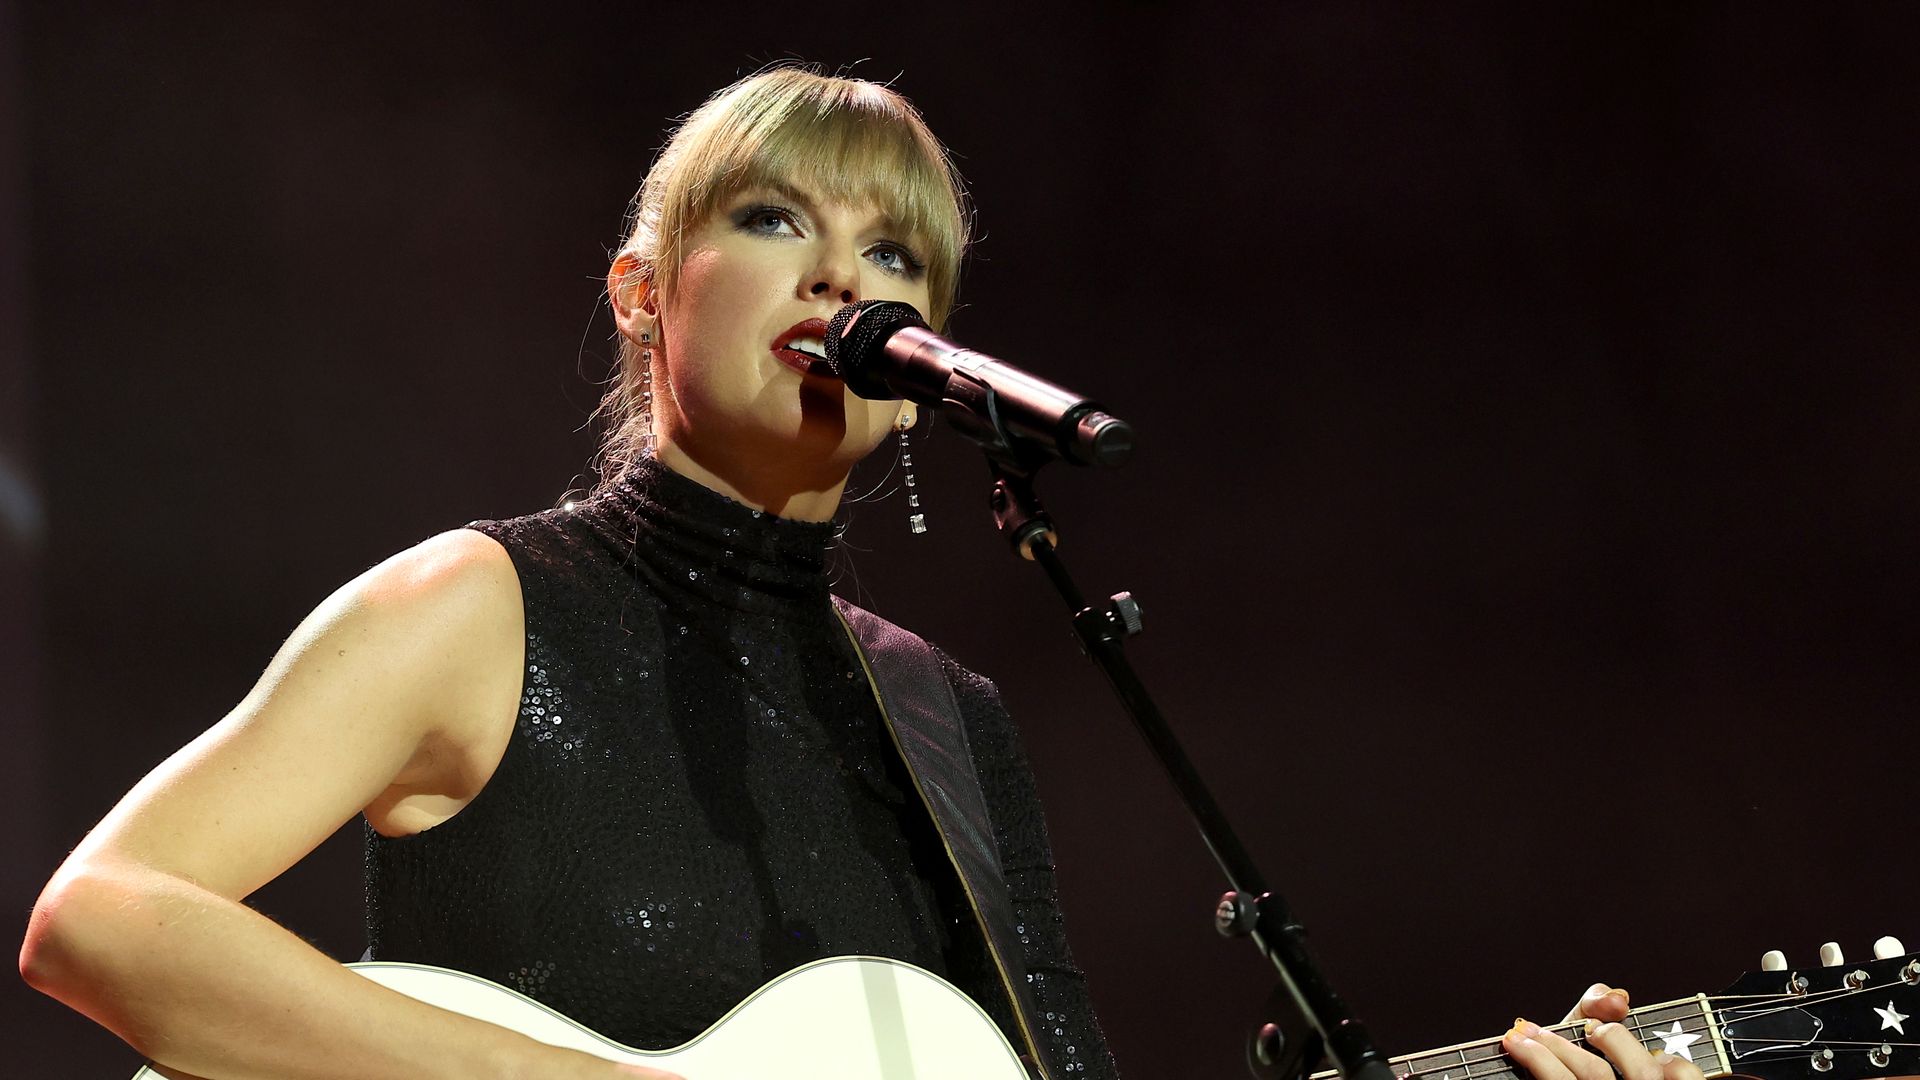 Taylor Swift plays guitar while singing into a microphone.